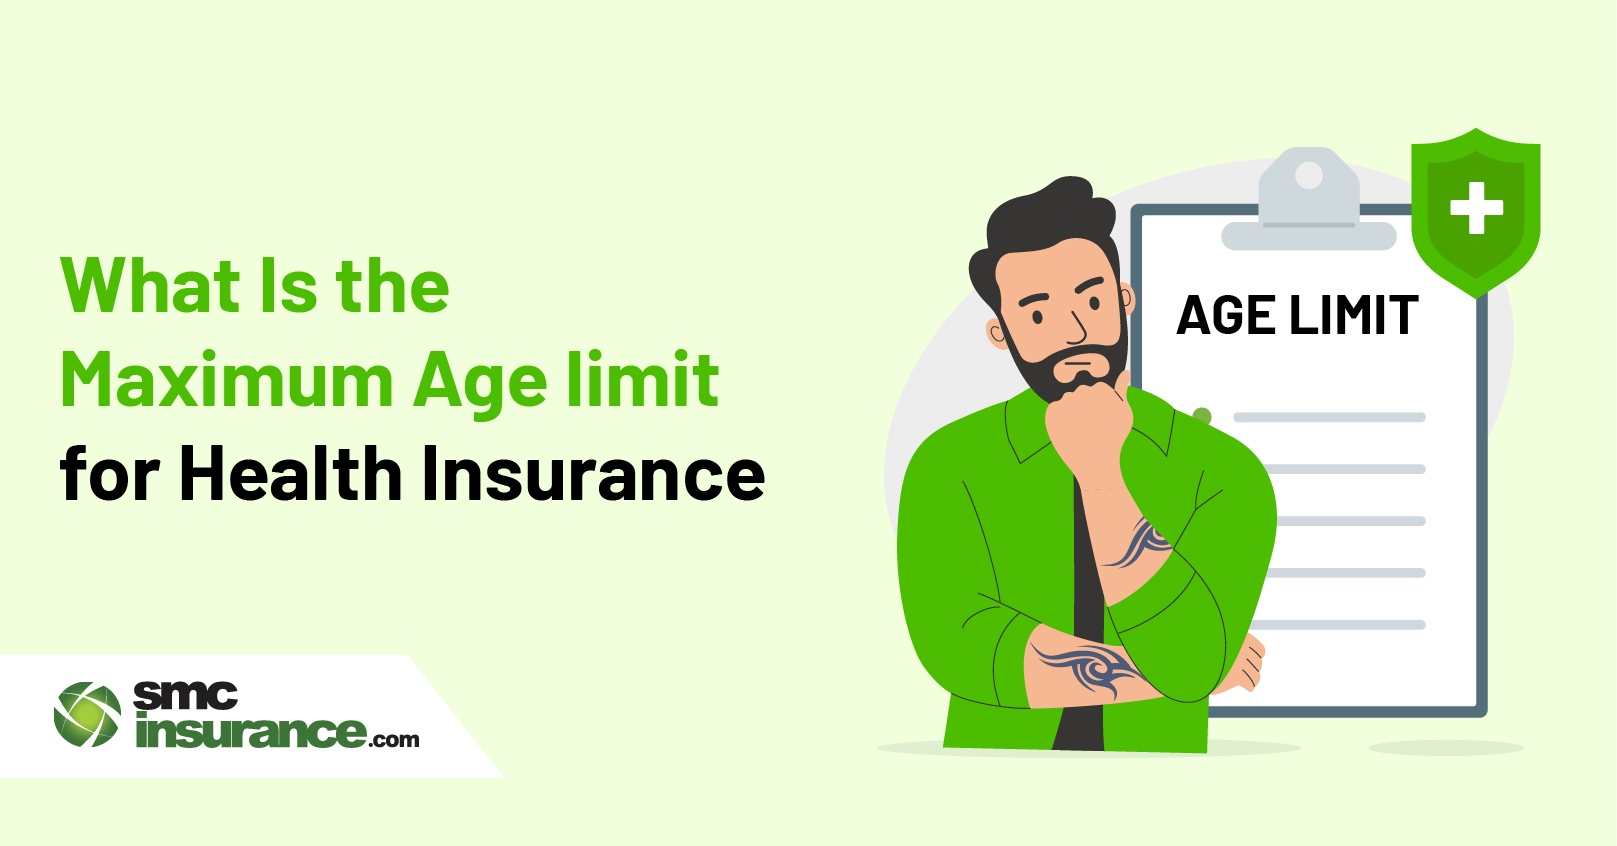 What is the Maximum Age limit for Health Insurance?